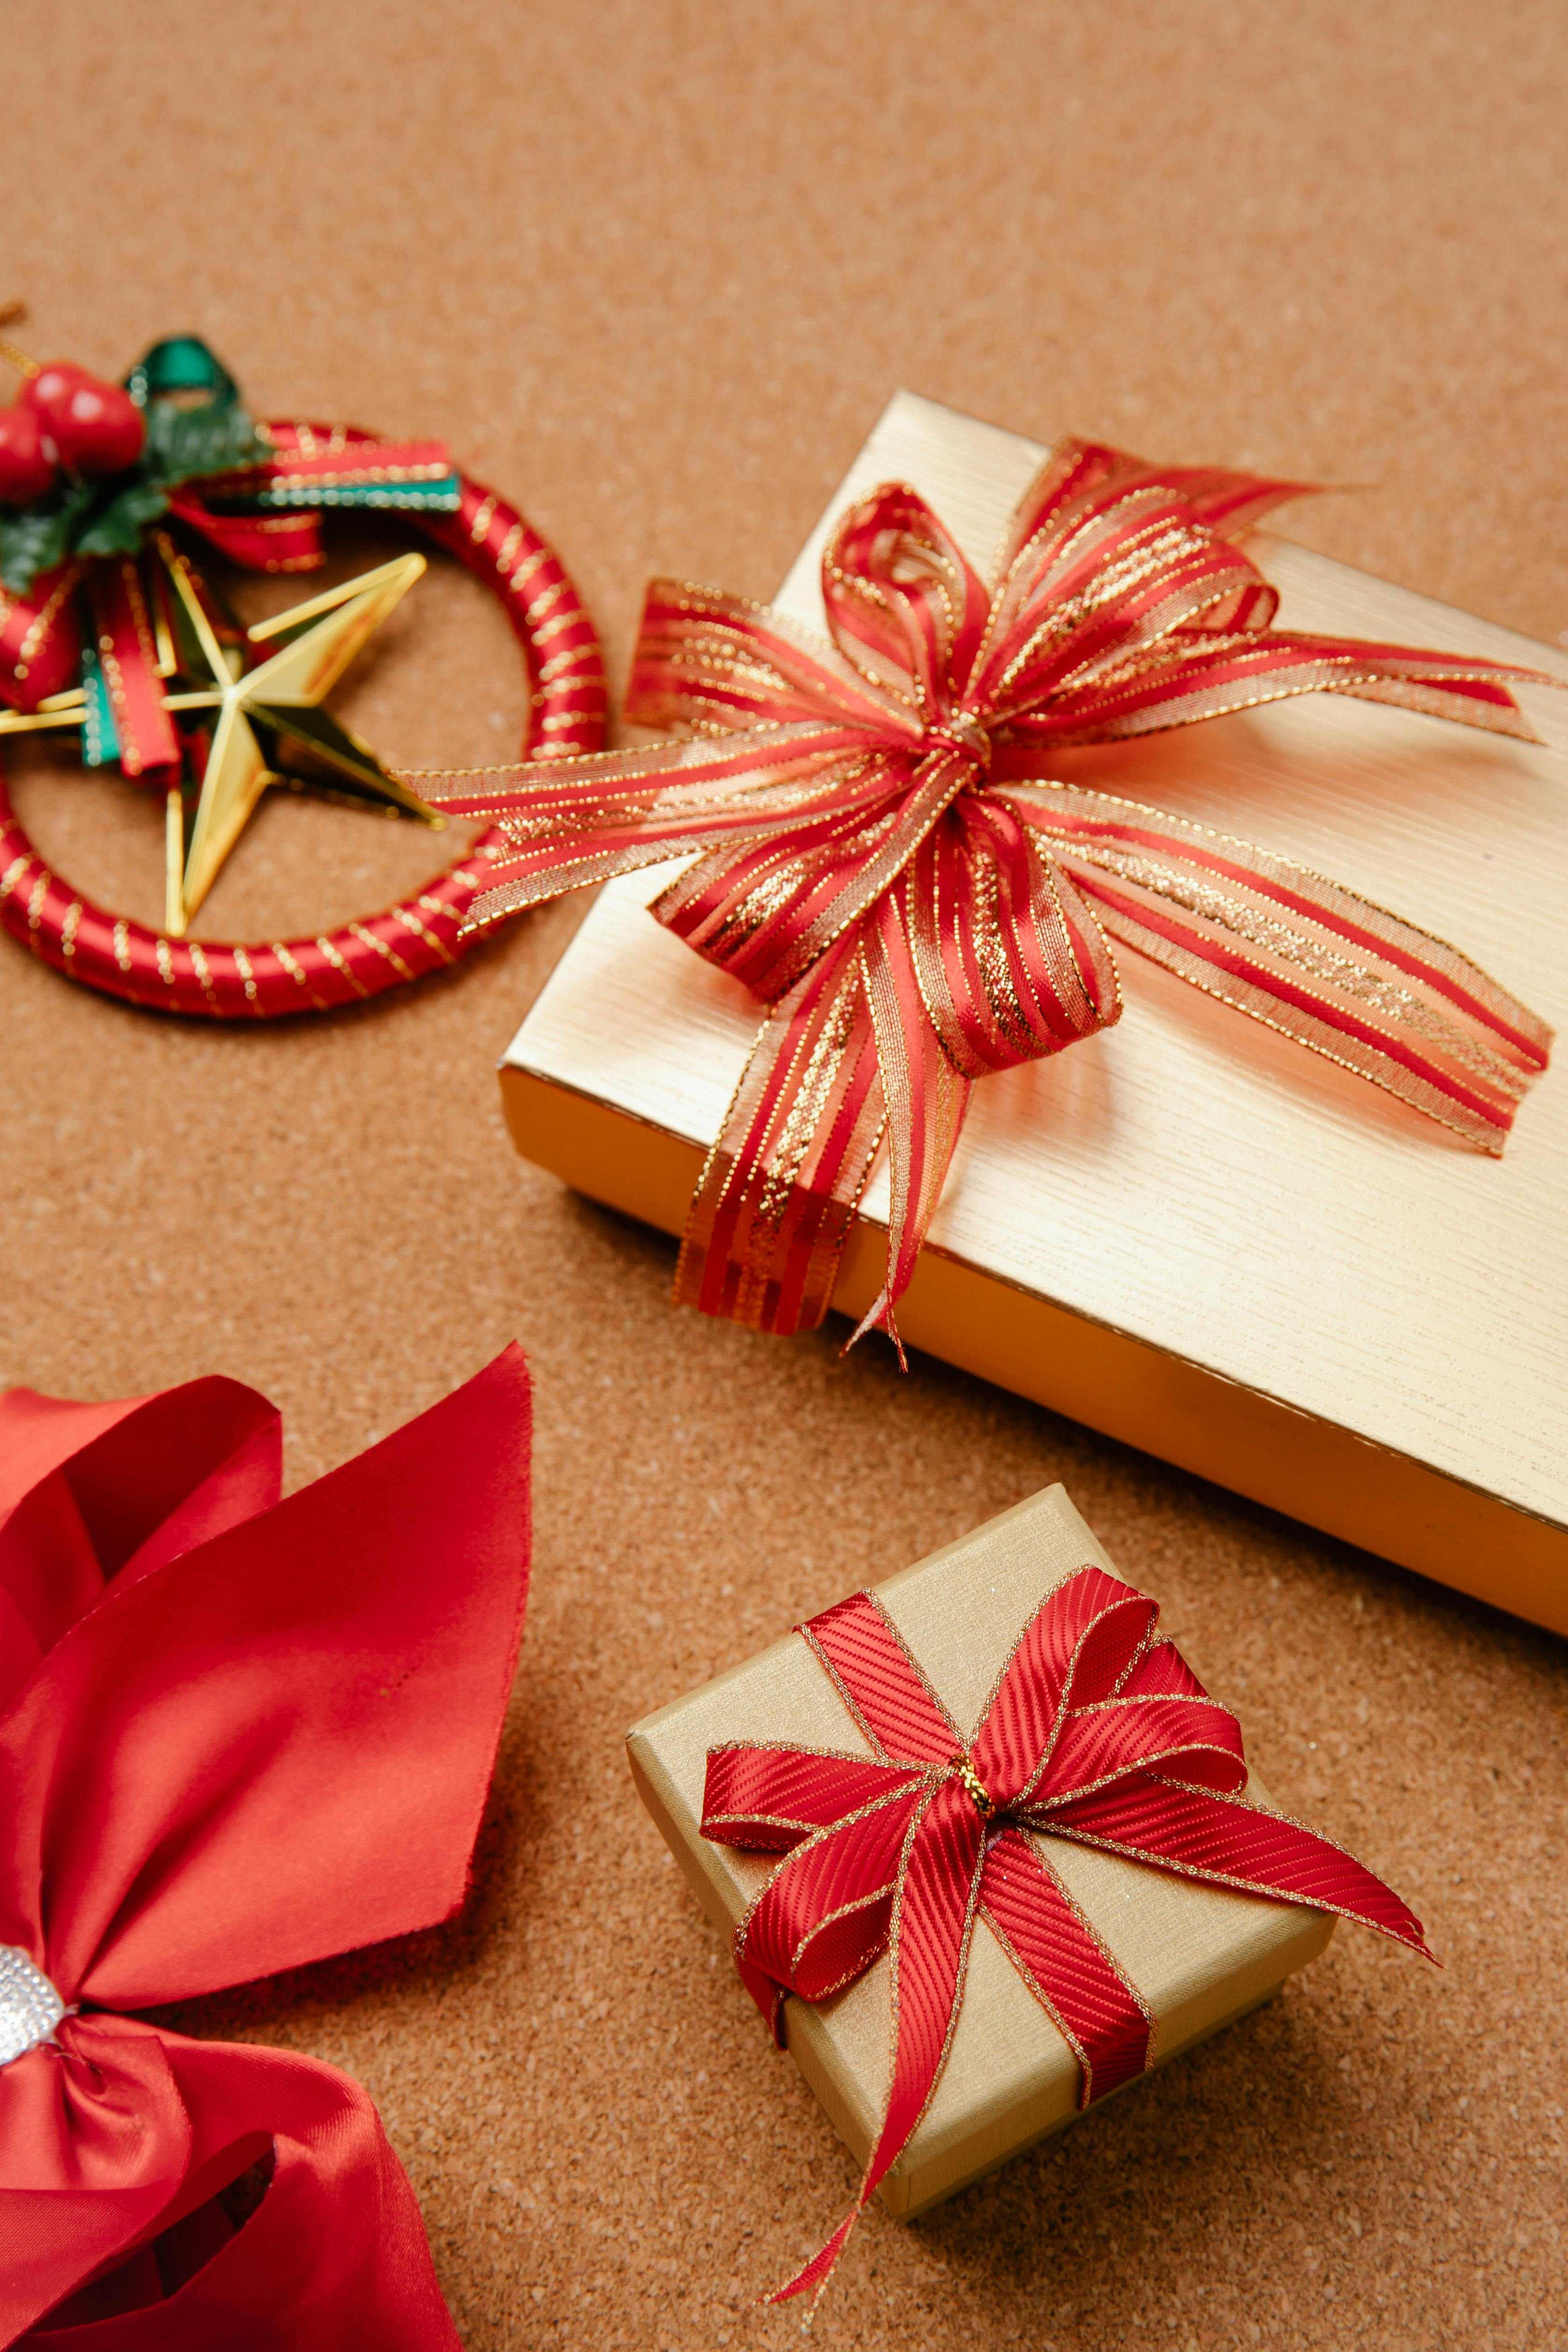 Heartfelt Gift Ideas: How to Choose the Perf